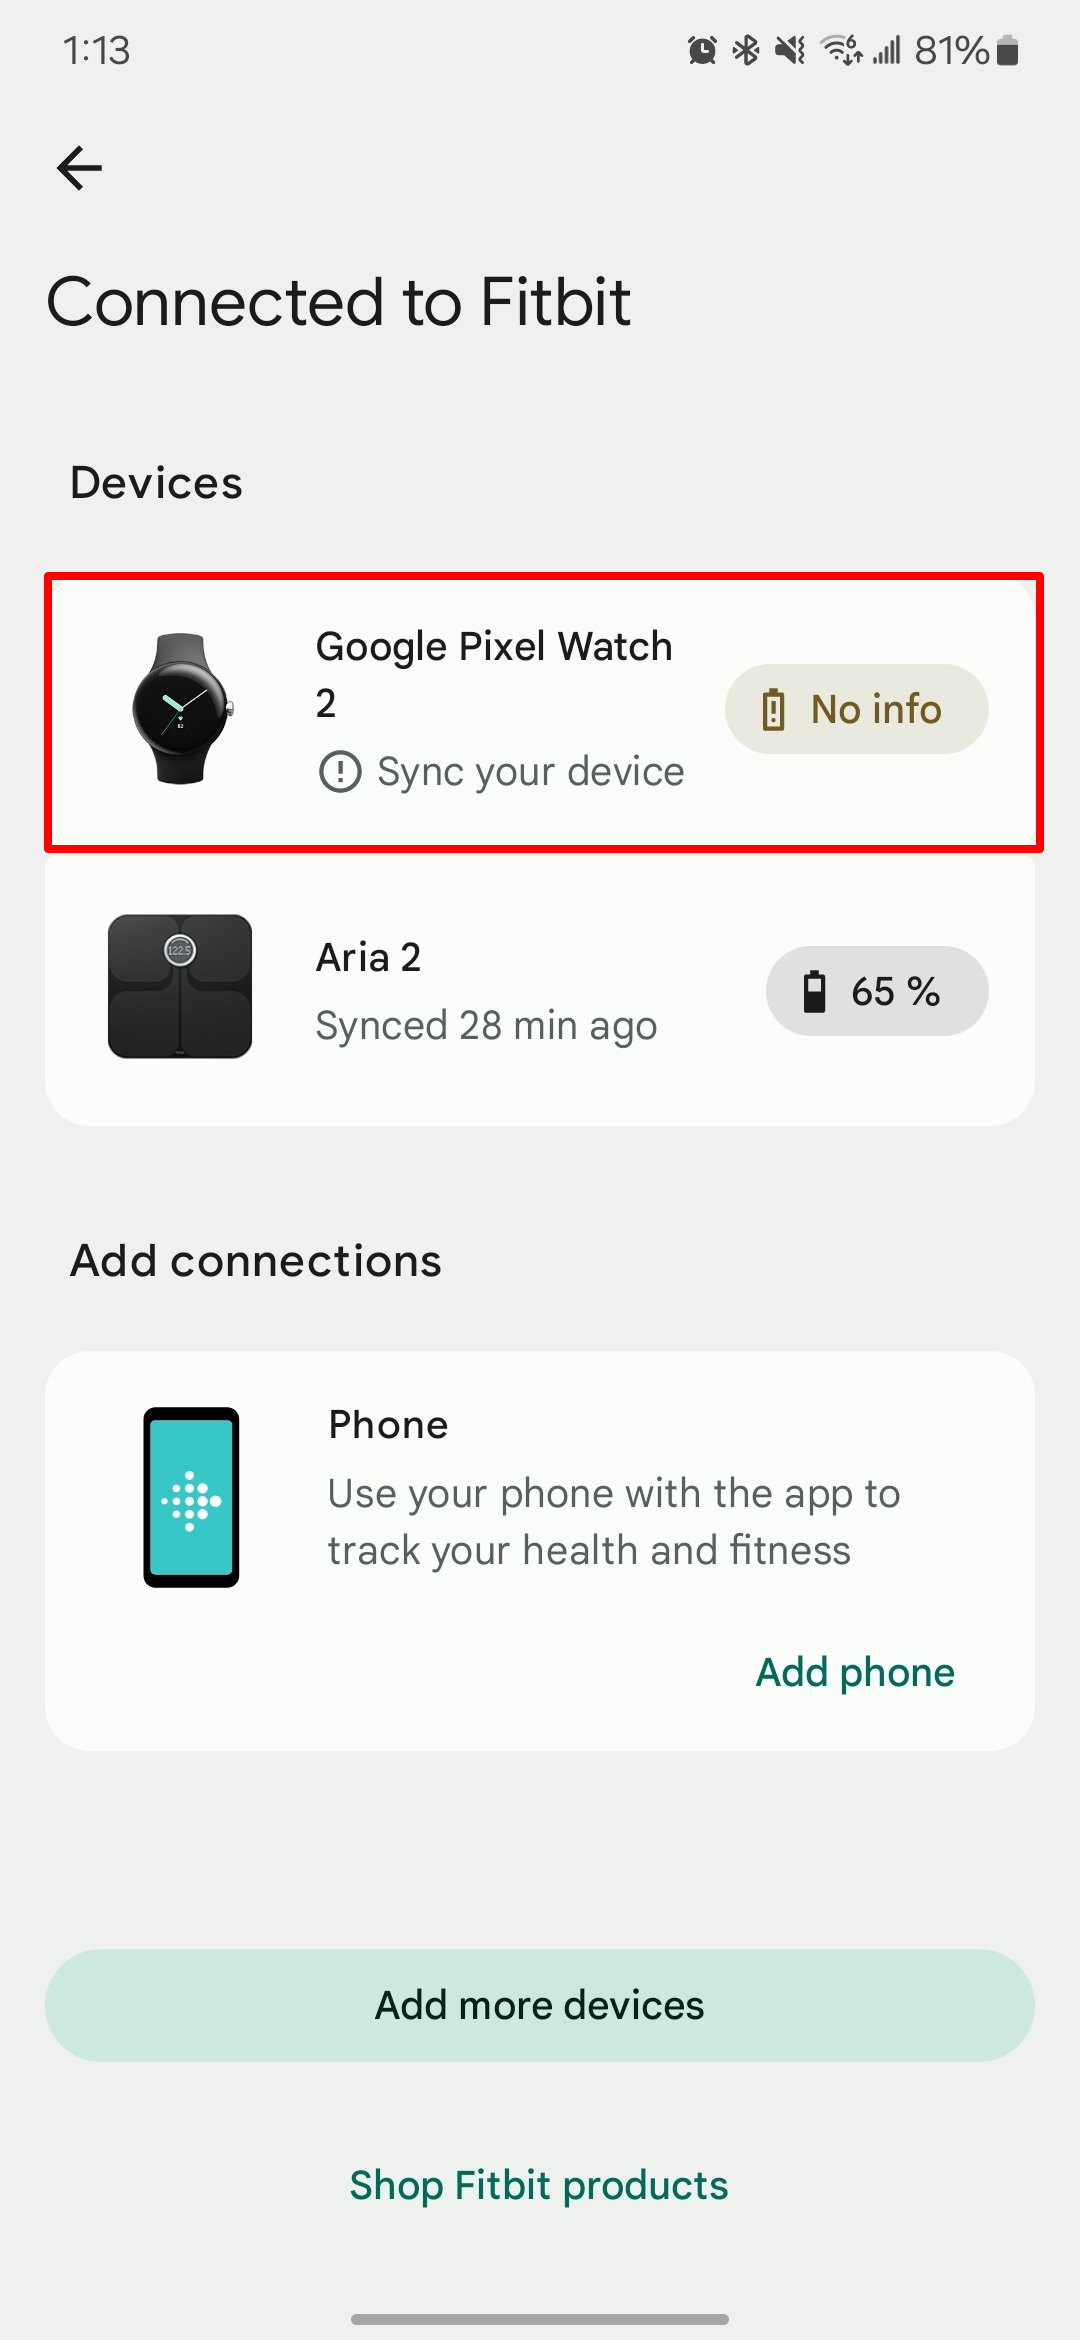 Screenshot of Fitbit app showing connected devices with Google Pixel Watch 2 highlighted.